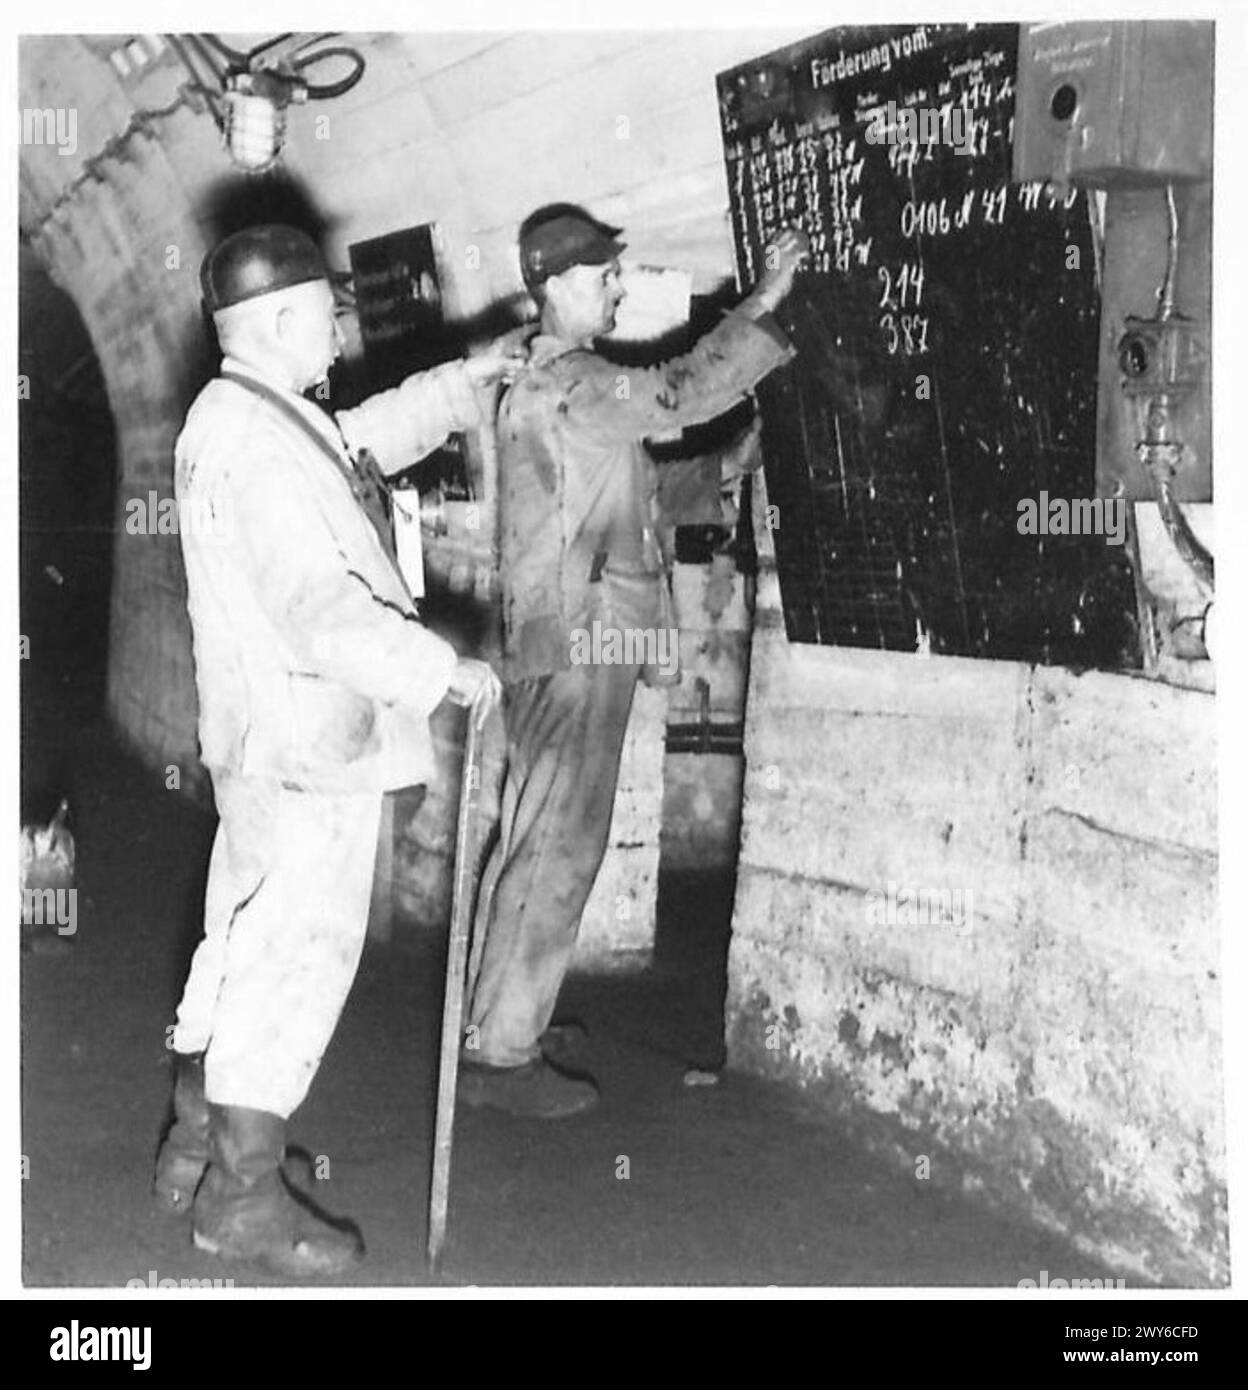 THE NORTH GERMAN COAL CONTROL - An underground foreman checks the number of train loads being chalked up by one of his workers. , British Army of the Rhine Stock Photo